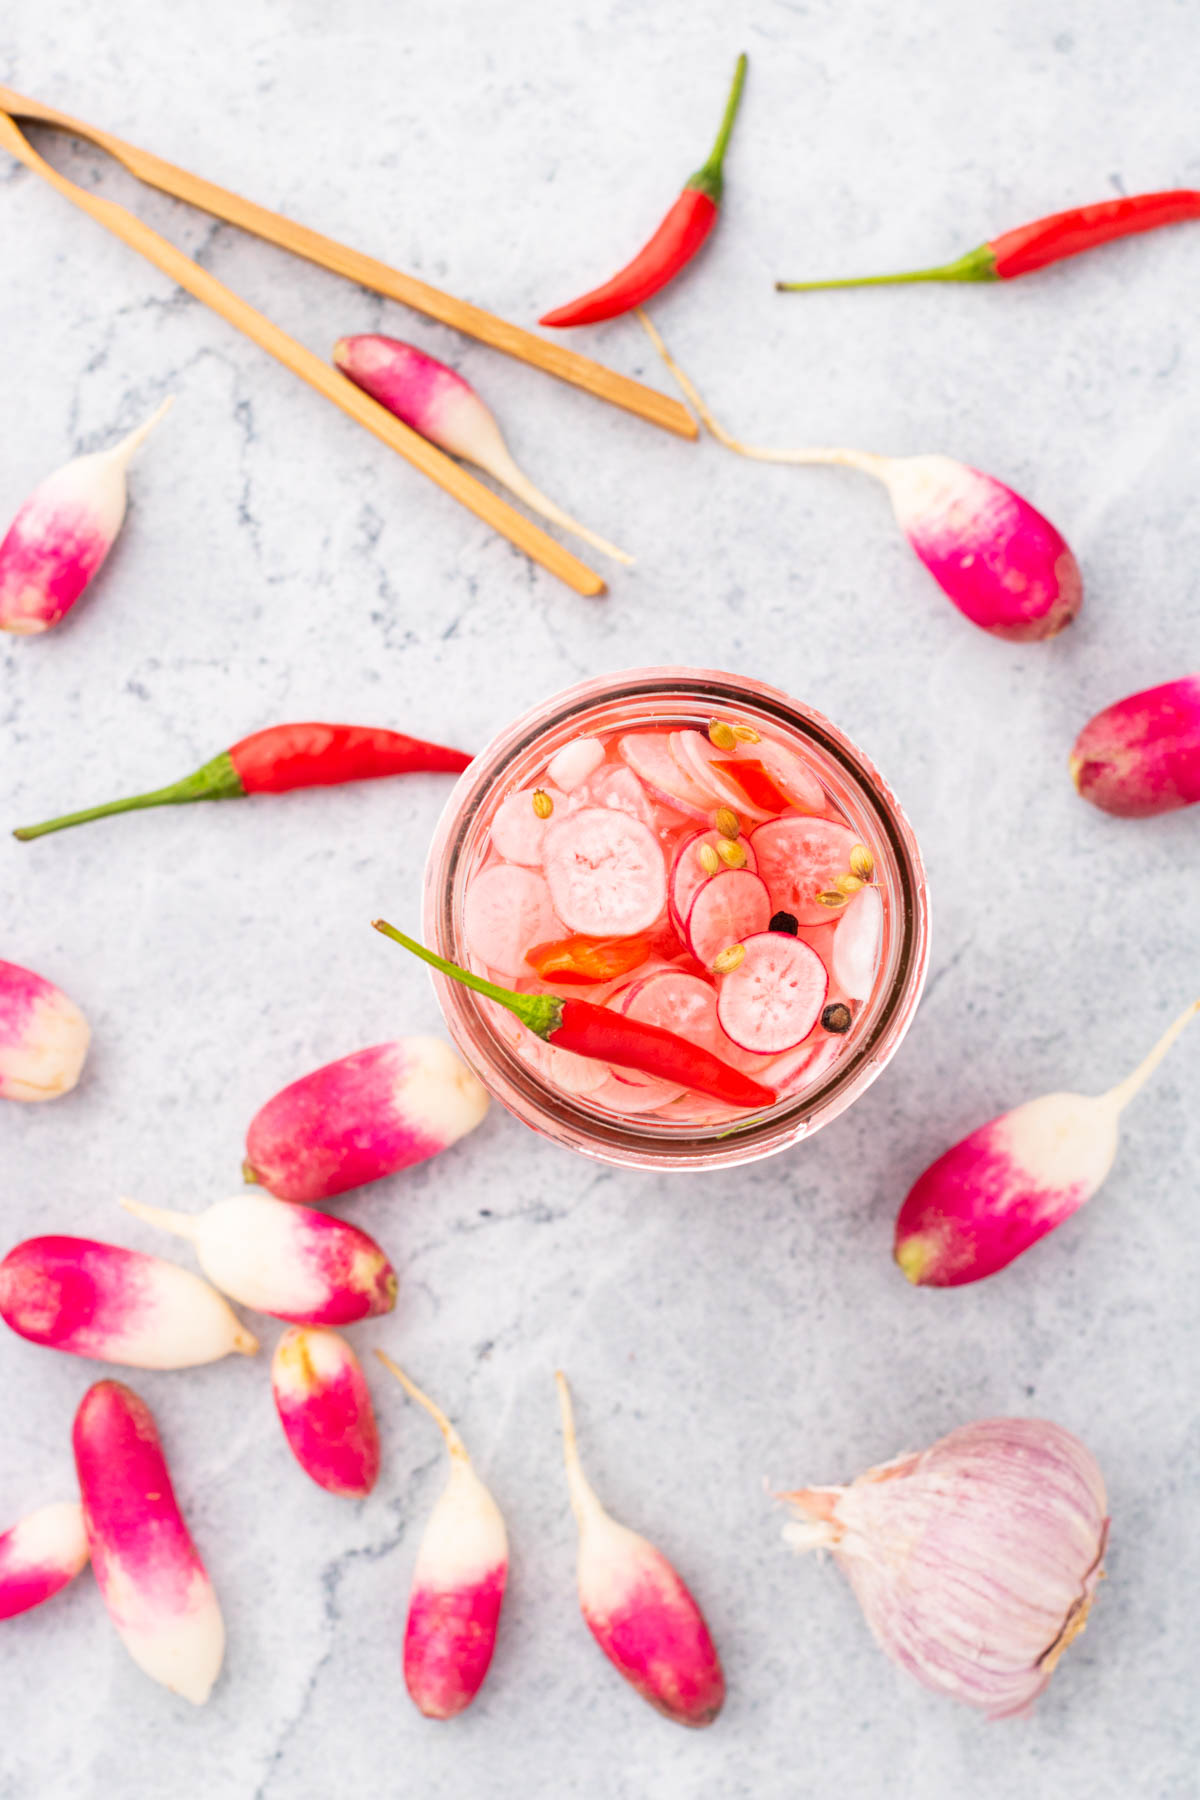 The top of an open glass jar filled with sliced radishes, red chili pepper, peppercorns, and coriander seeds. Surrounded by bright radishes, garlic, and red chilis.